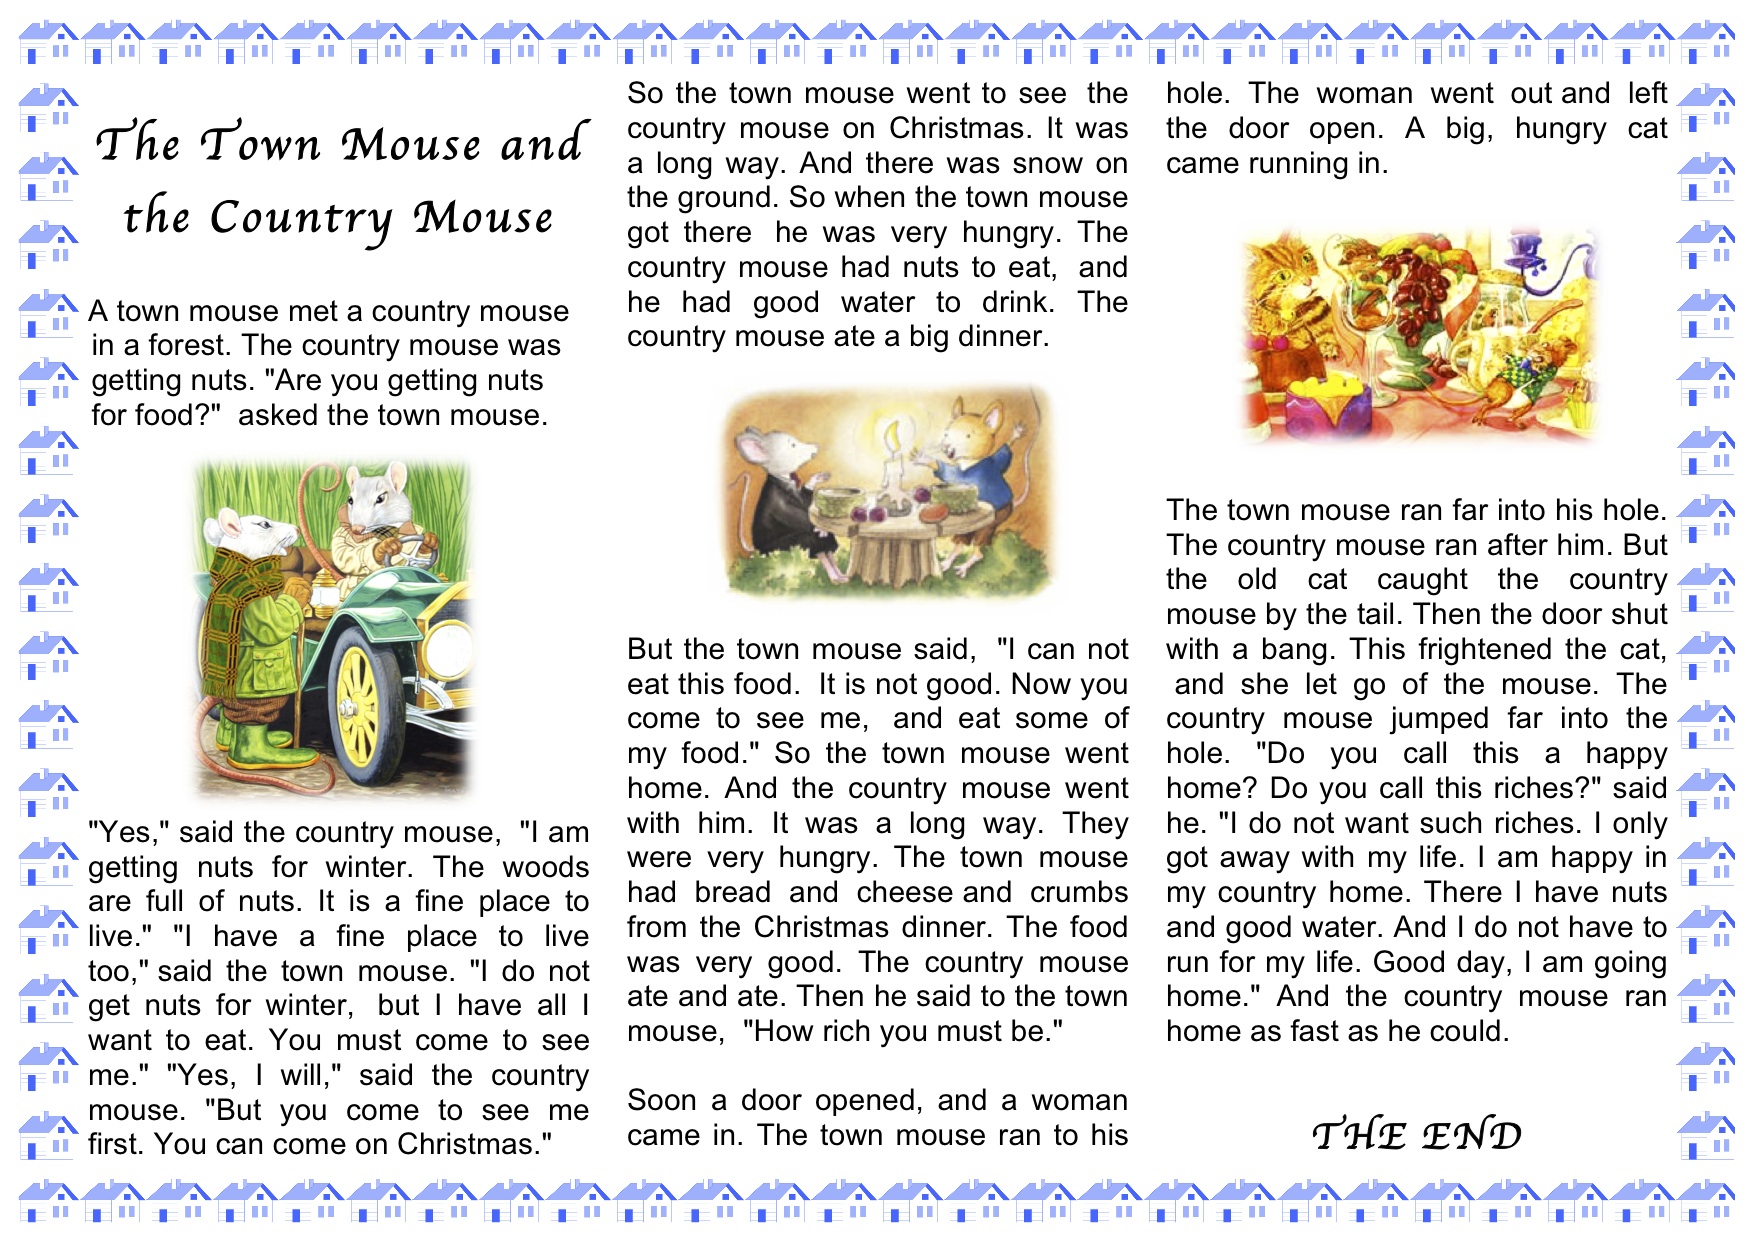 С английского на русский язык mice. Country Mouse Town Mouse спотлайт 2. Сказка the Town Mouse and the Country Mouse. The Town Mouse and the Country Mouse текст. Town Mouse and Country Mouse задания.